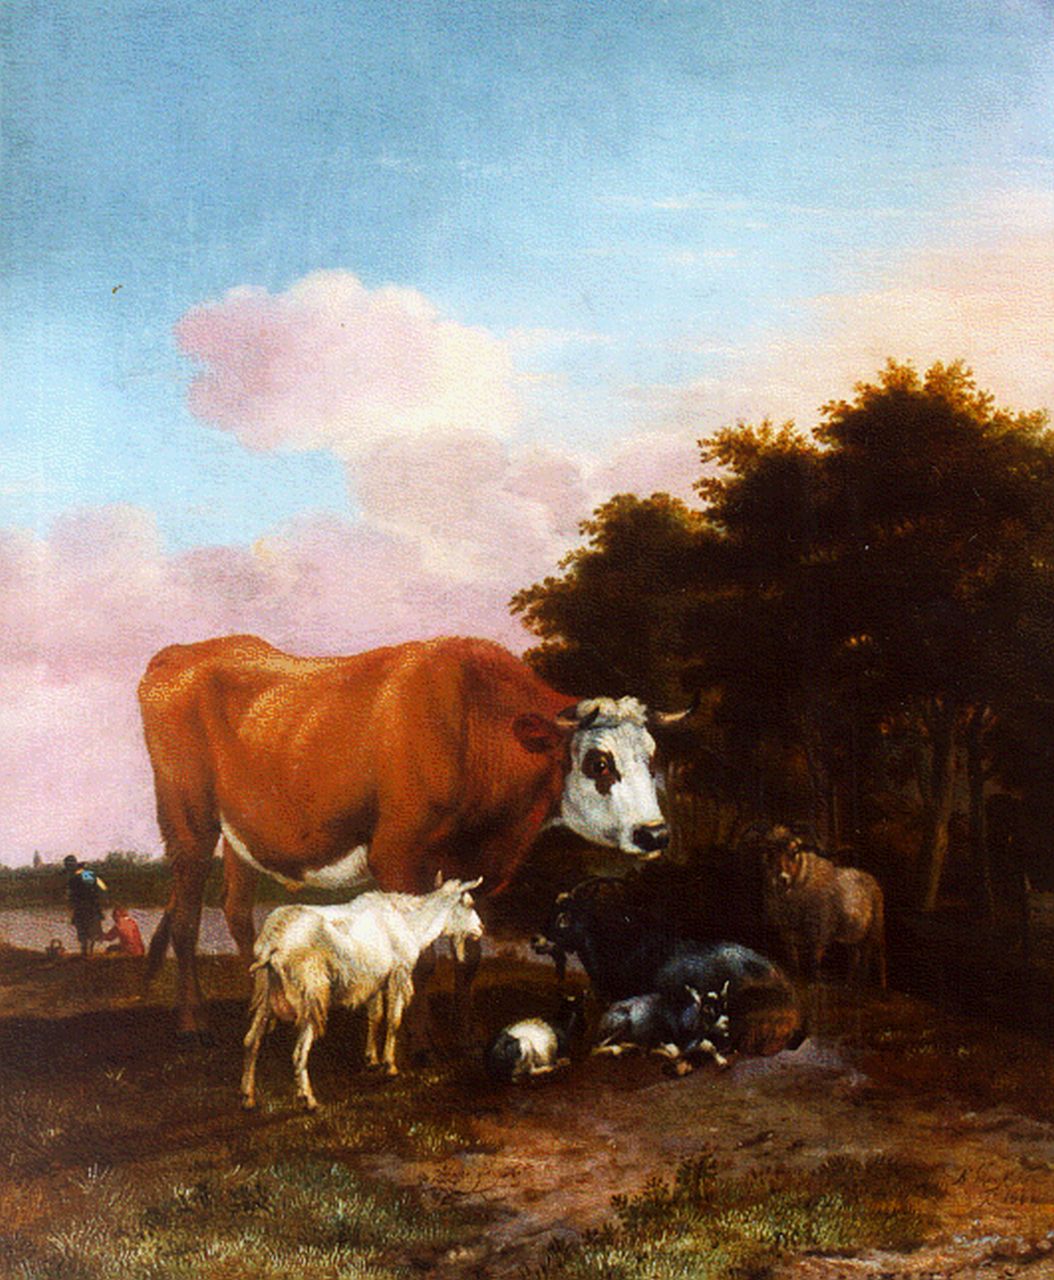 Janz Klomp A.  | Albert Janz Klomp, Cattle in a landscape, oil on panel 42.4 x 34.8 cm, signed l.r. and dated 1662